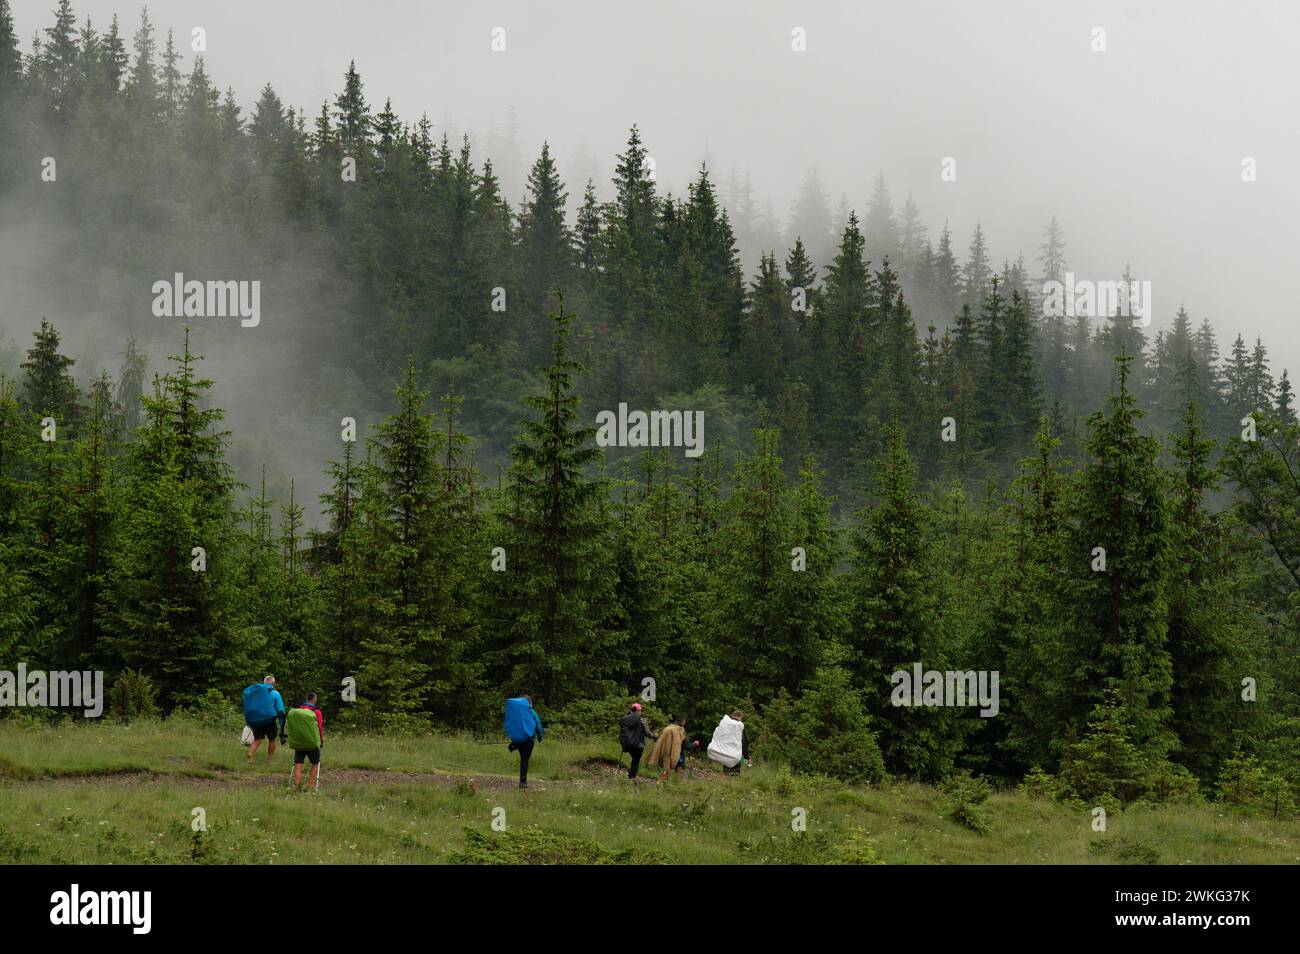 A tourist goes to the mountains in the rain and fog, unfavorable weather in the mountains for tourists. Stock Photo